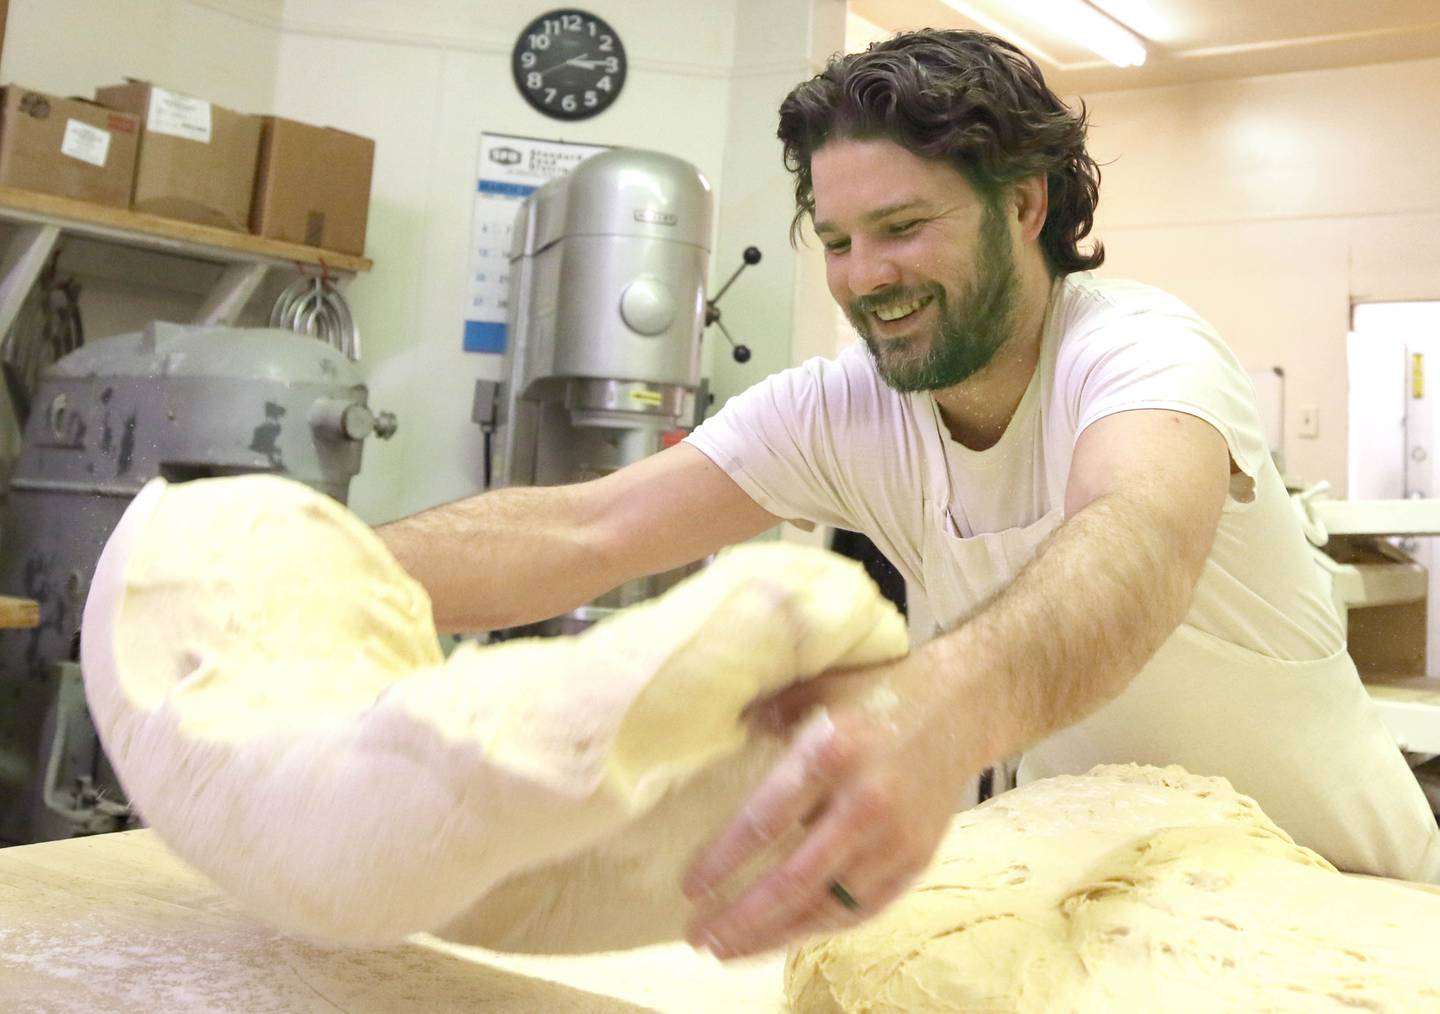 Eric Elleson, son of Ken Elleson, owner of Elleson's Bakery, separates the dough before it is sliced up for paczkis Monday, Feb. 28, 2022, in the kitchen of the bakery in Sycamore. Eric Elleson came in from Michigan especially for this day to help out his dad and members of his family who will be working all night making the paczkis from scratch to be ready at 5 a.m. tomorrow for Fat Tuesday.